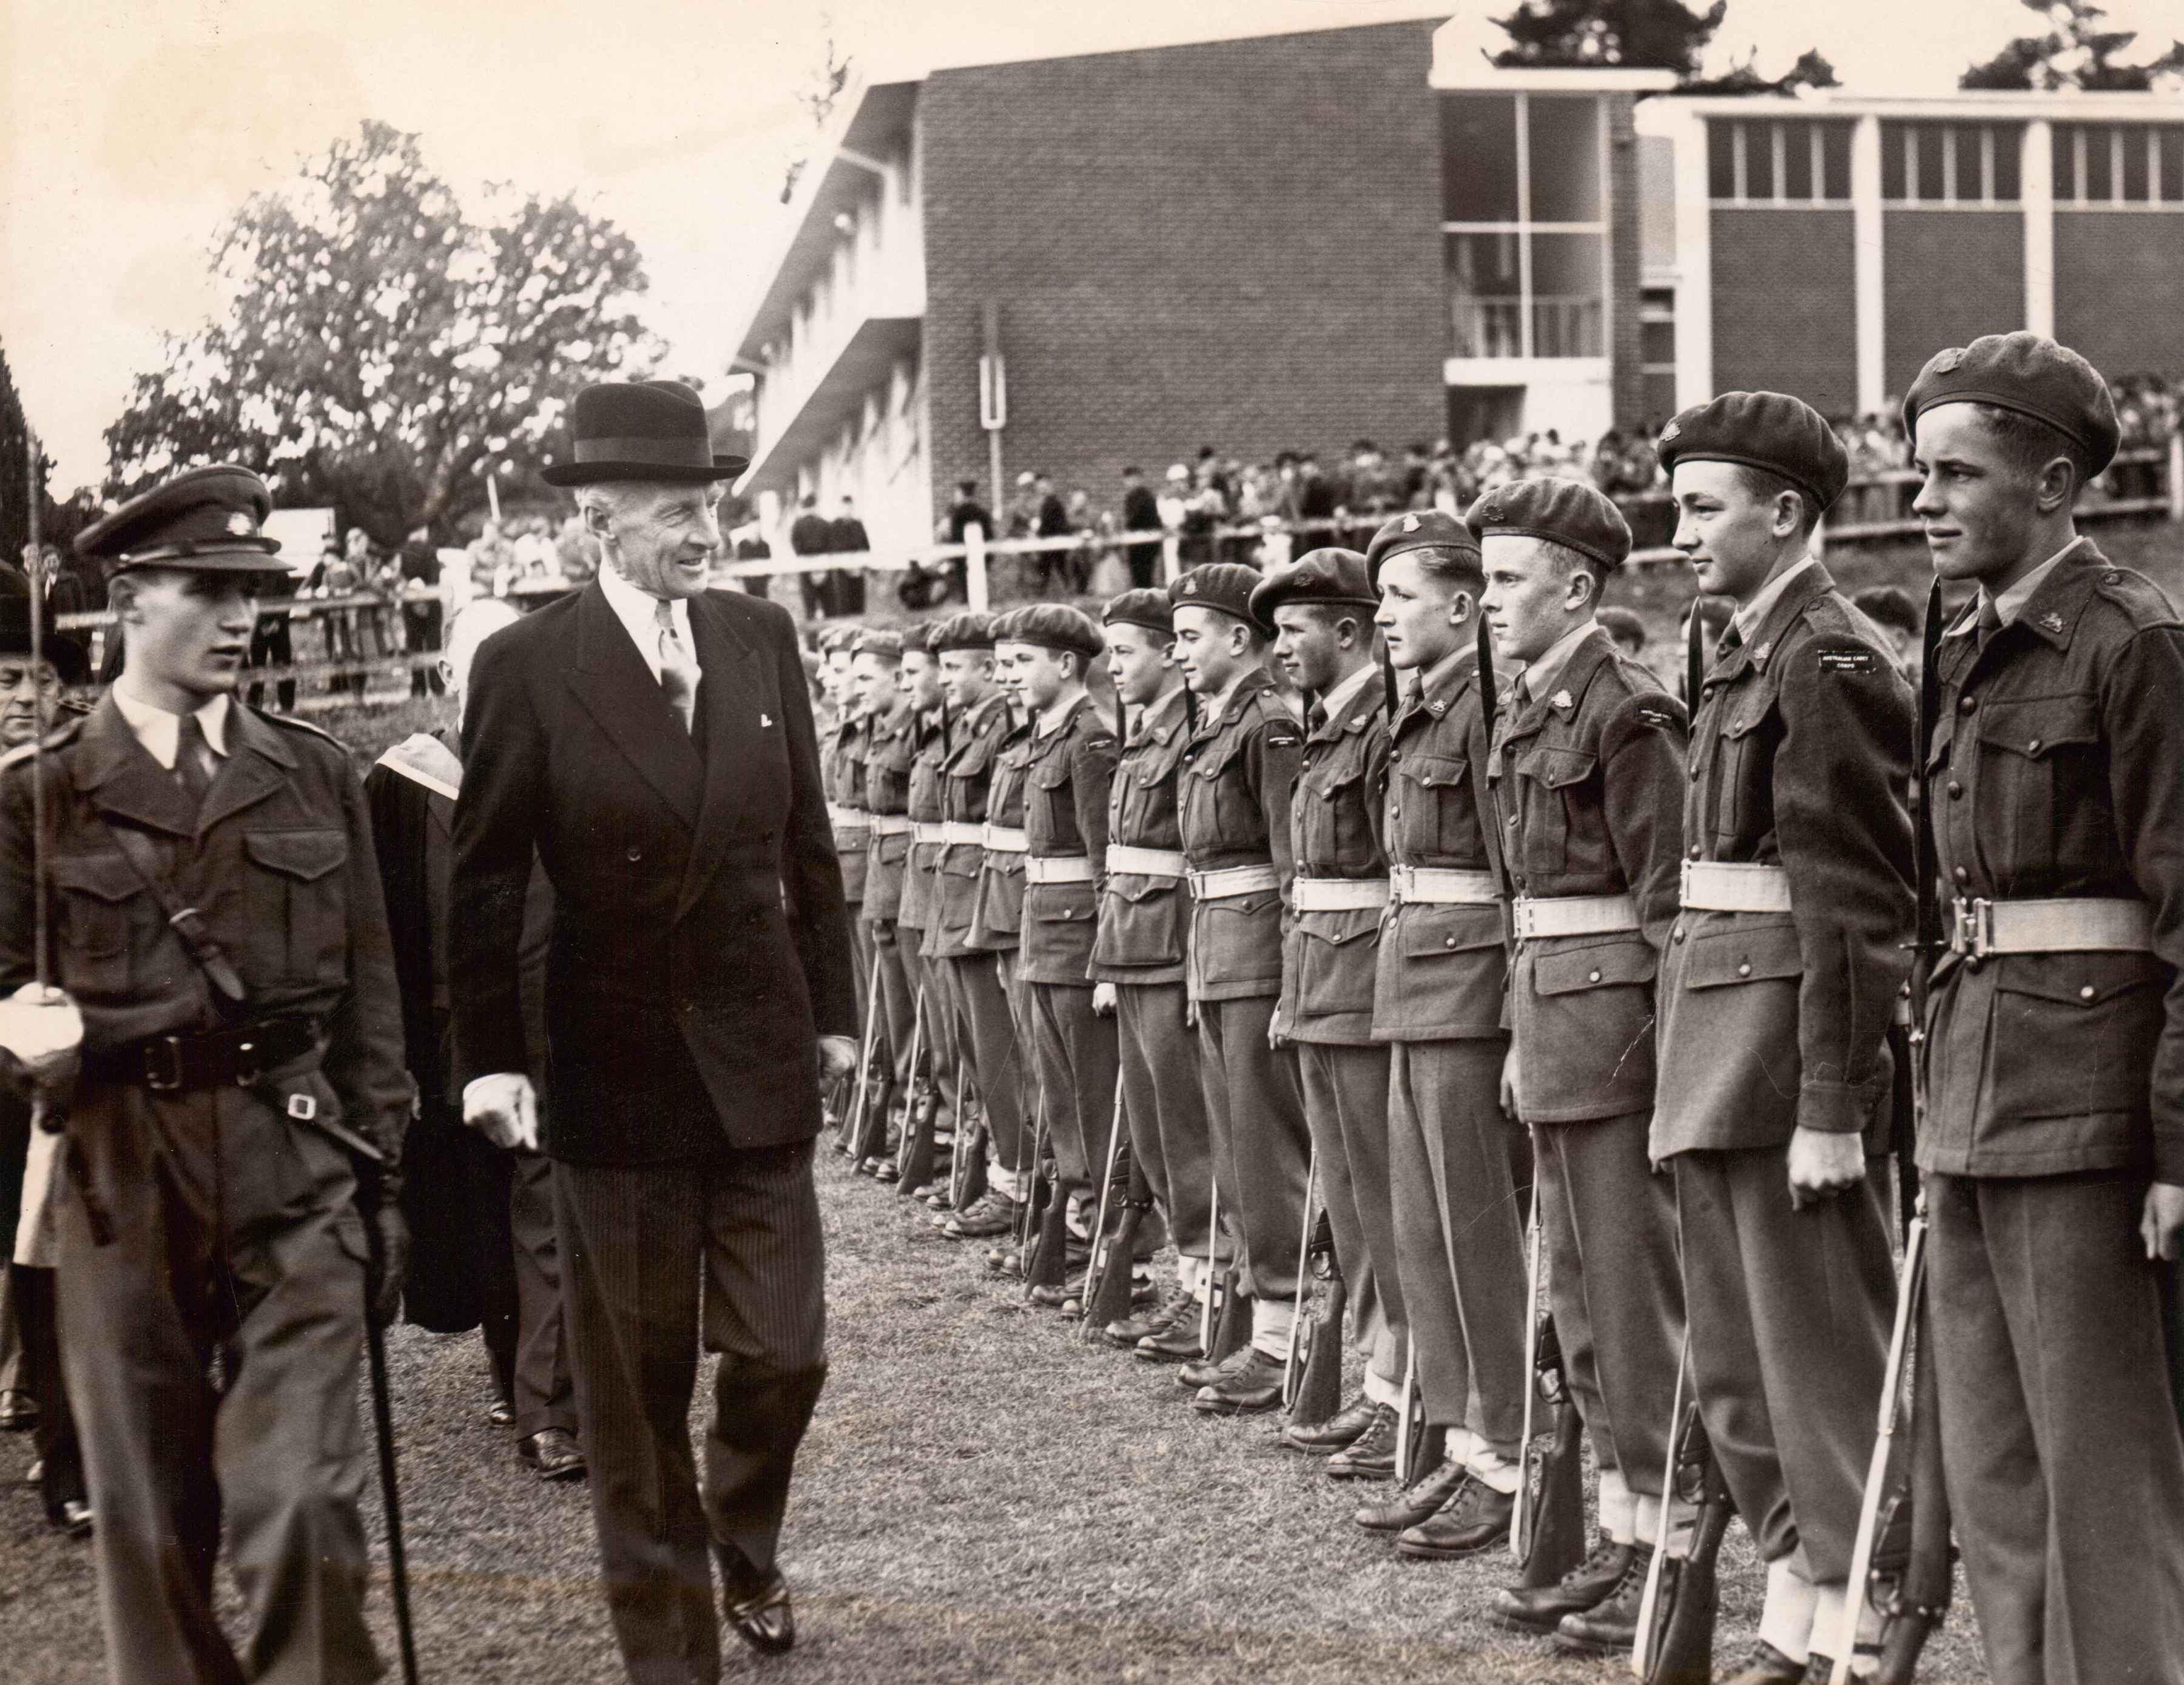 Governor Sir Ronald Cross inspecting Cadets at the opening of Junior School, 1957.